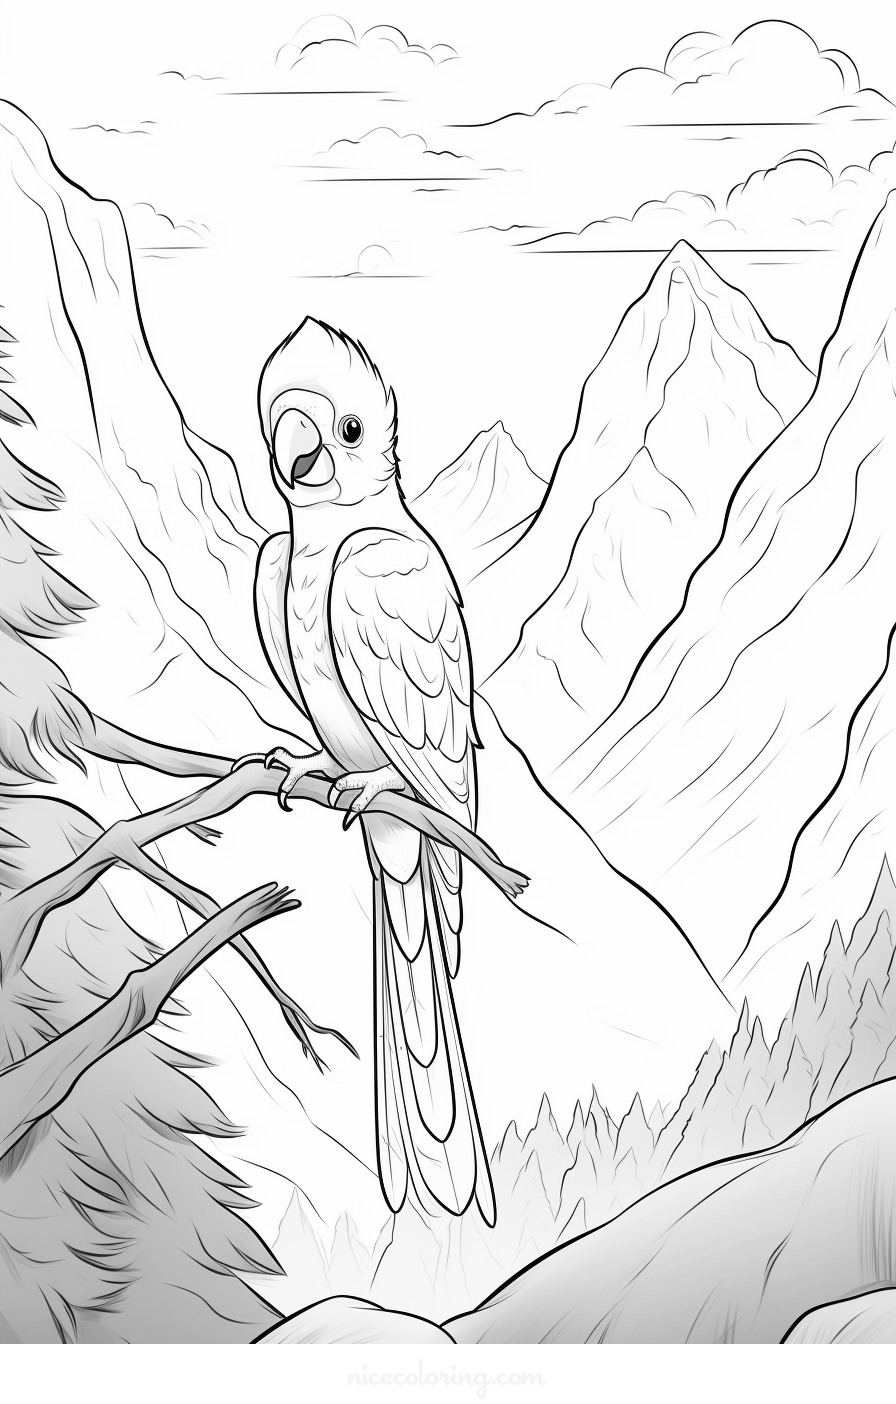 A bird perched on a branch